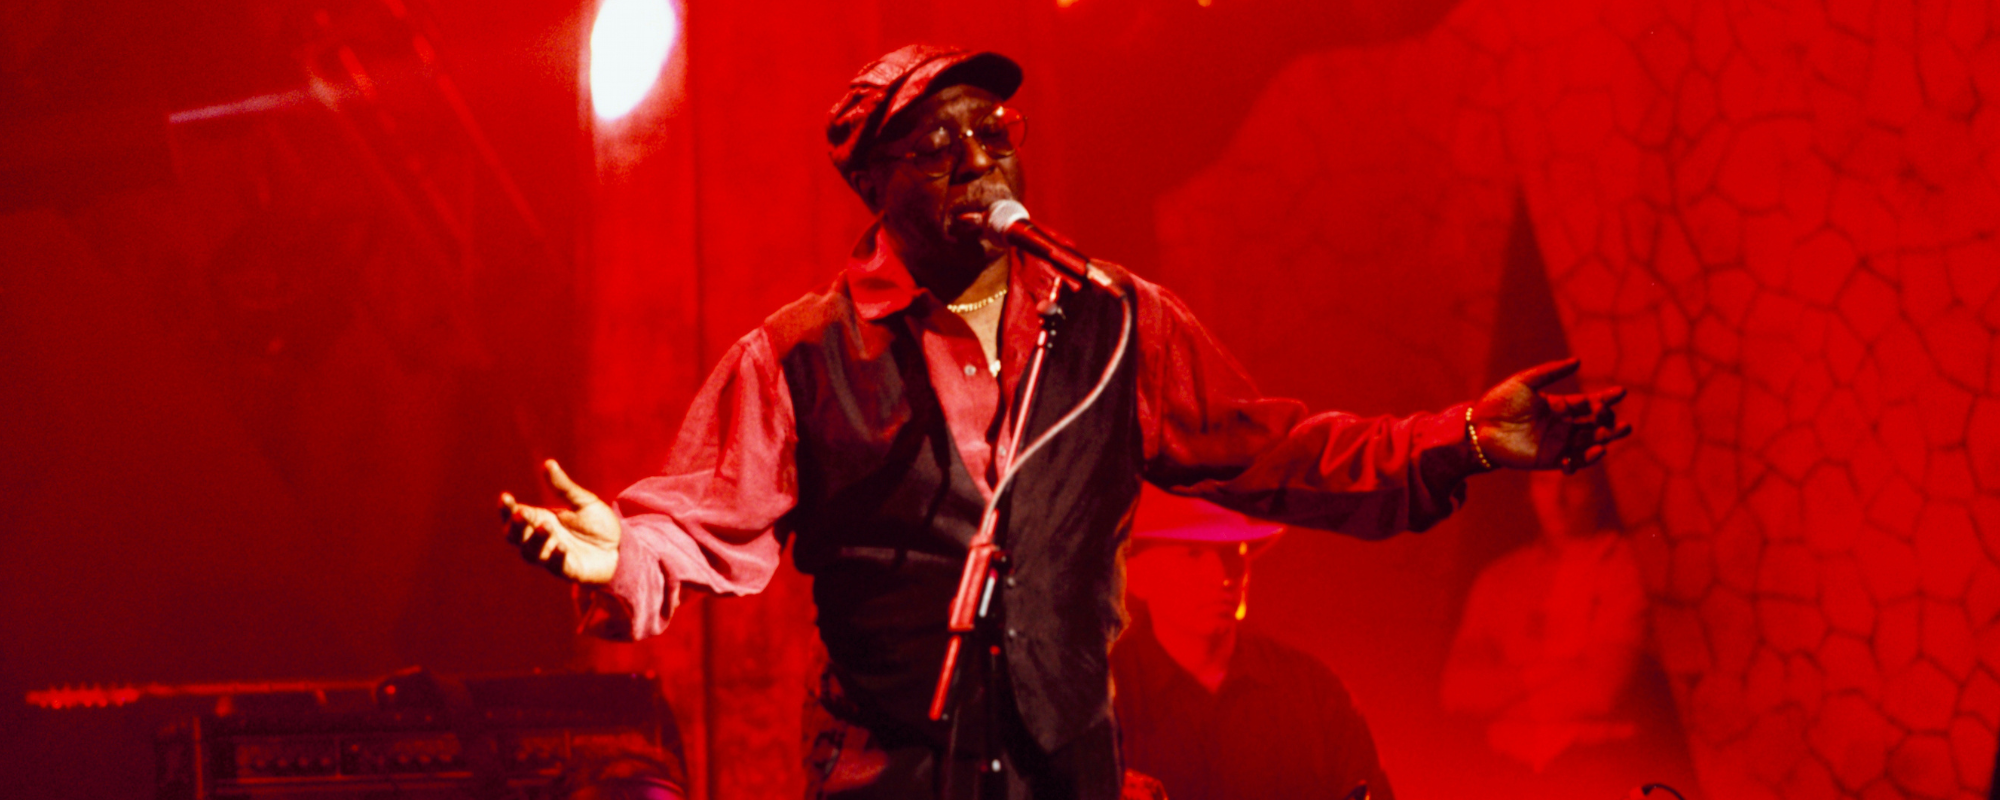 5 Fascinating Facts About Curtis Mayfield